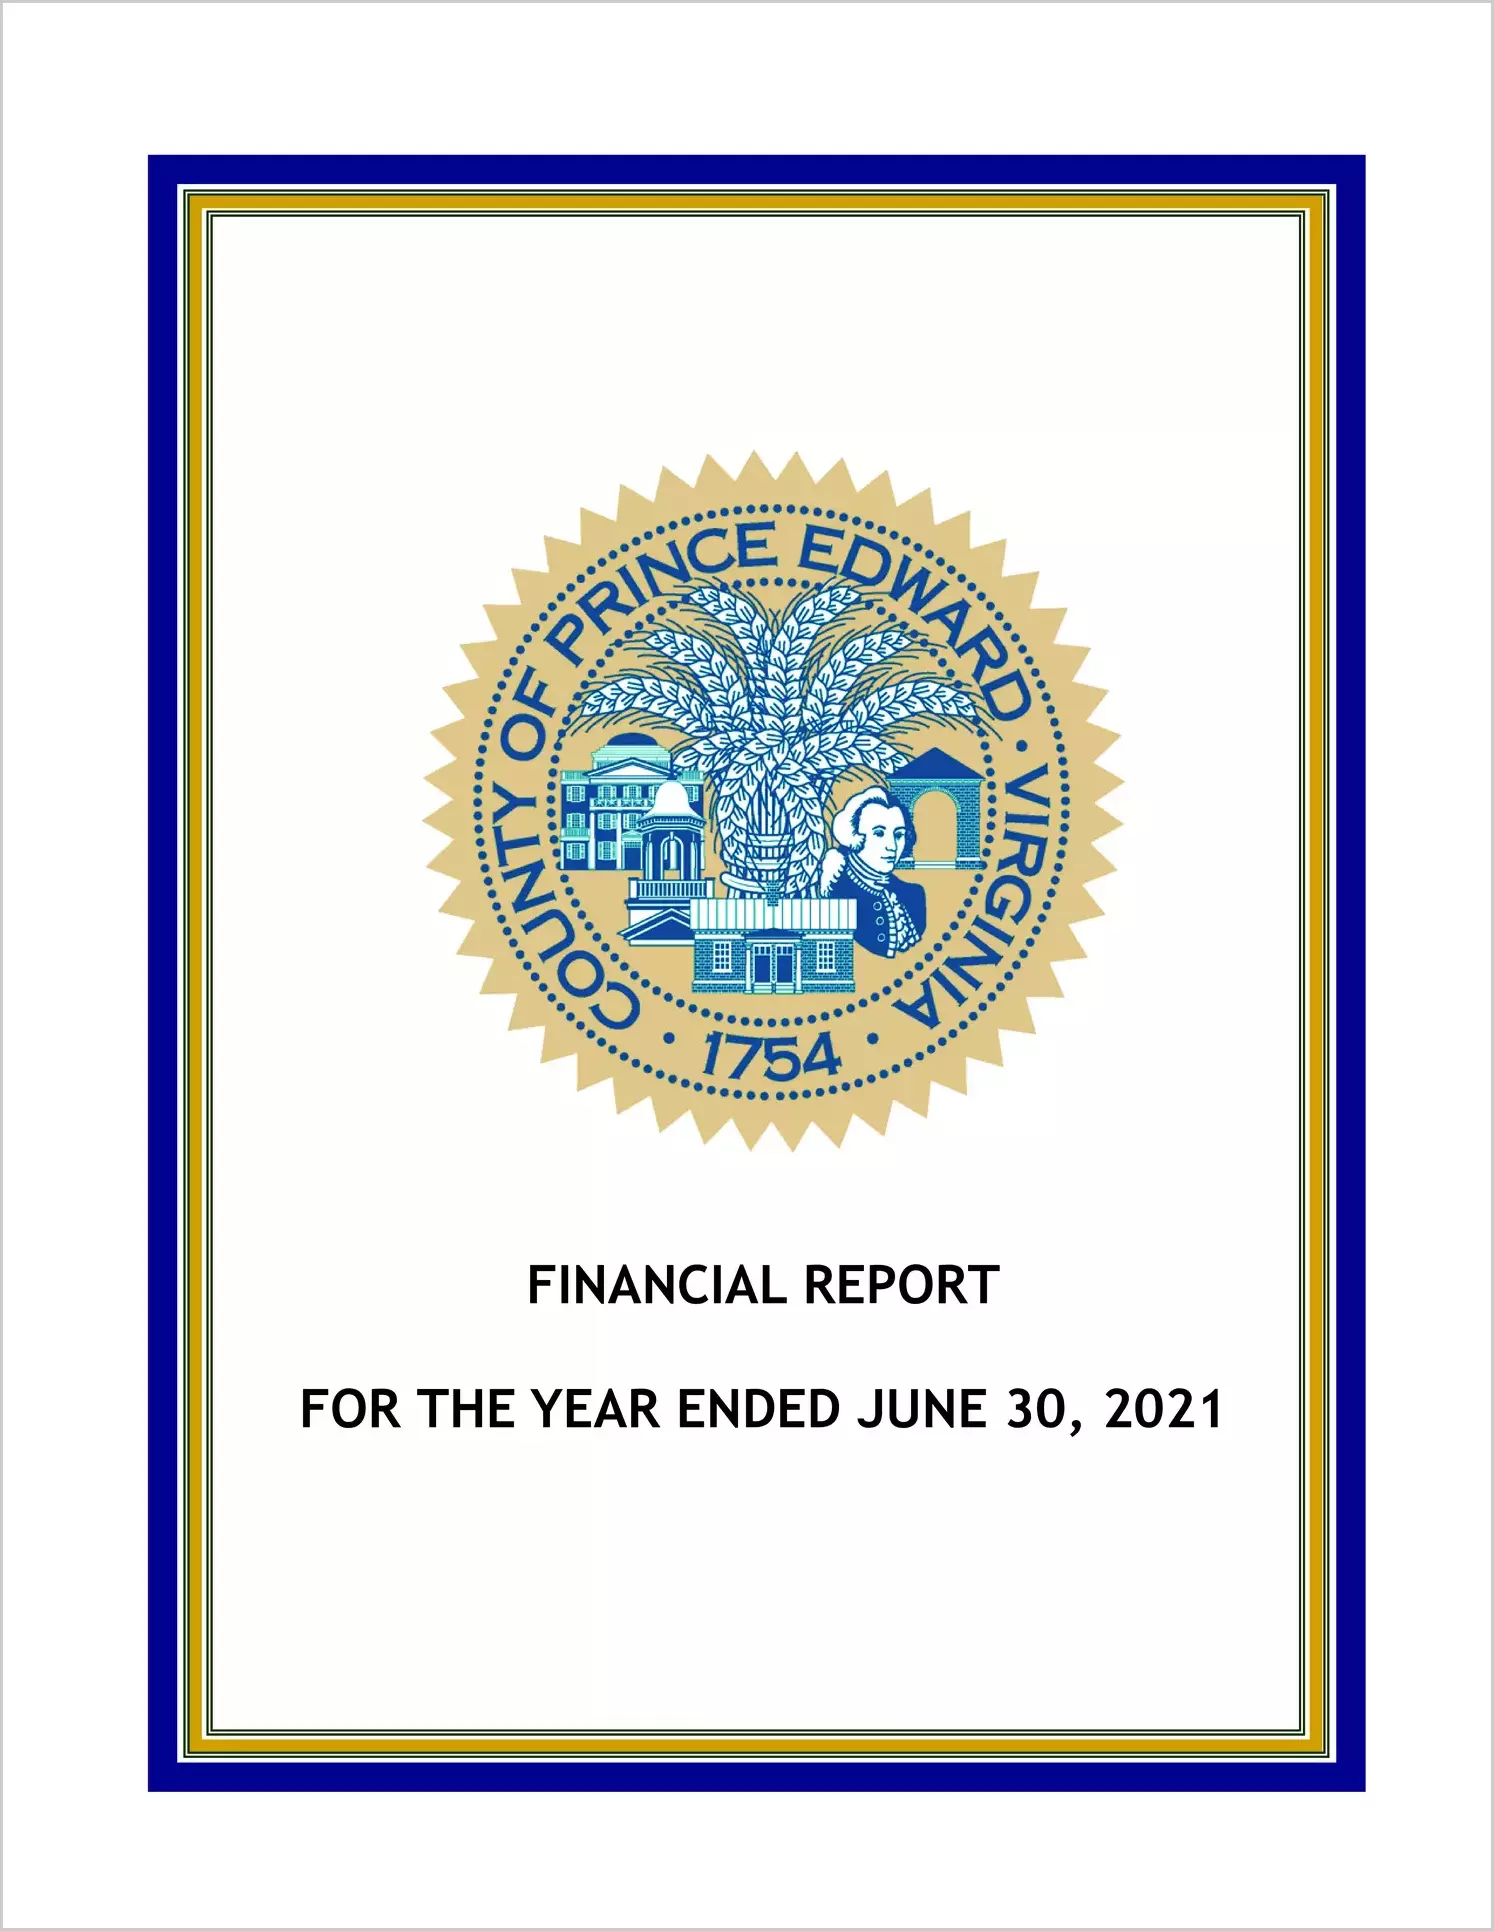 2021 Annual Financial Report for County of Prince Edward